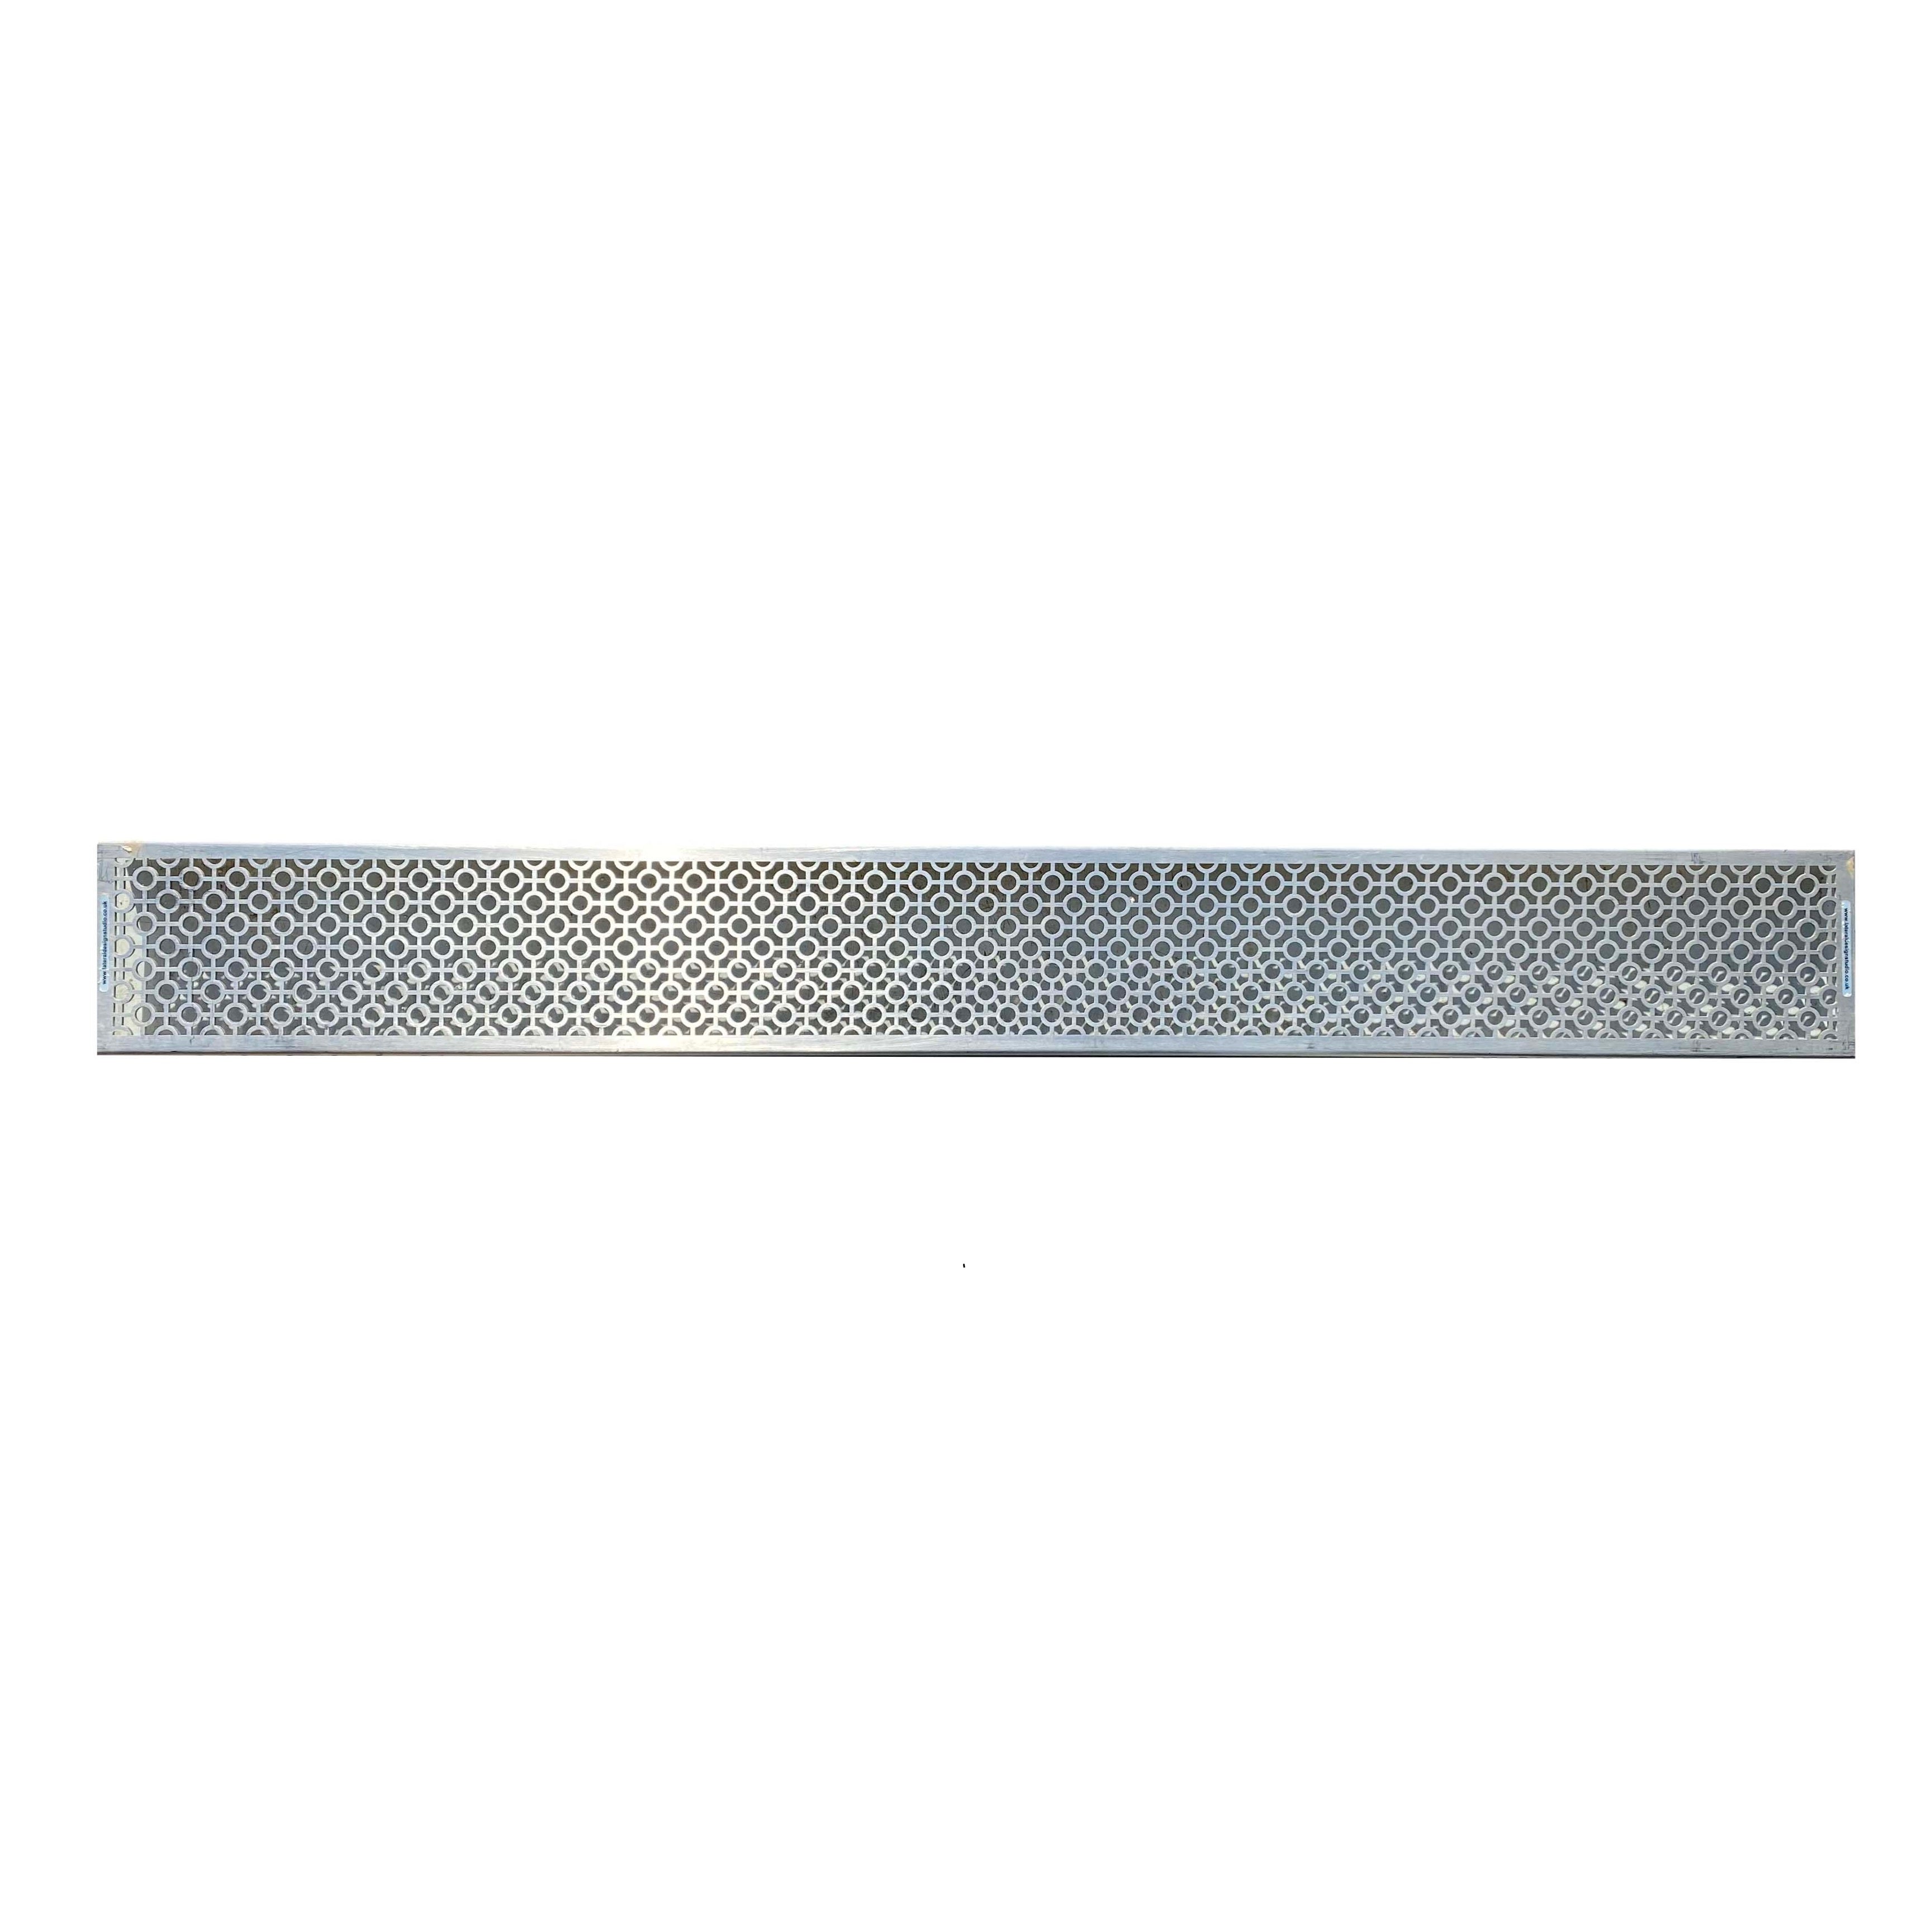 [CLEARANCE] Oxo 304 Stainless Steel Channel Drain Grate 125 x 1000mm (5 Inch)